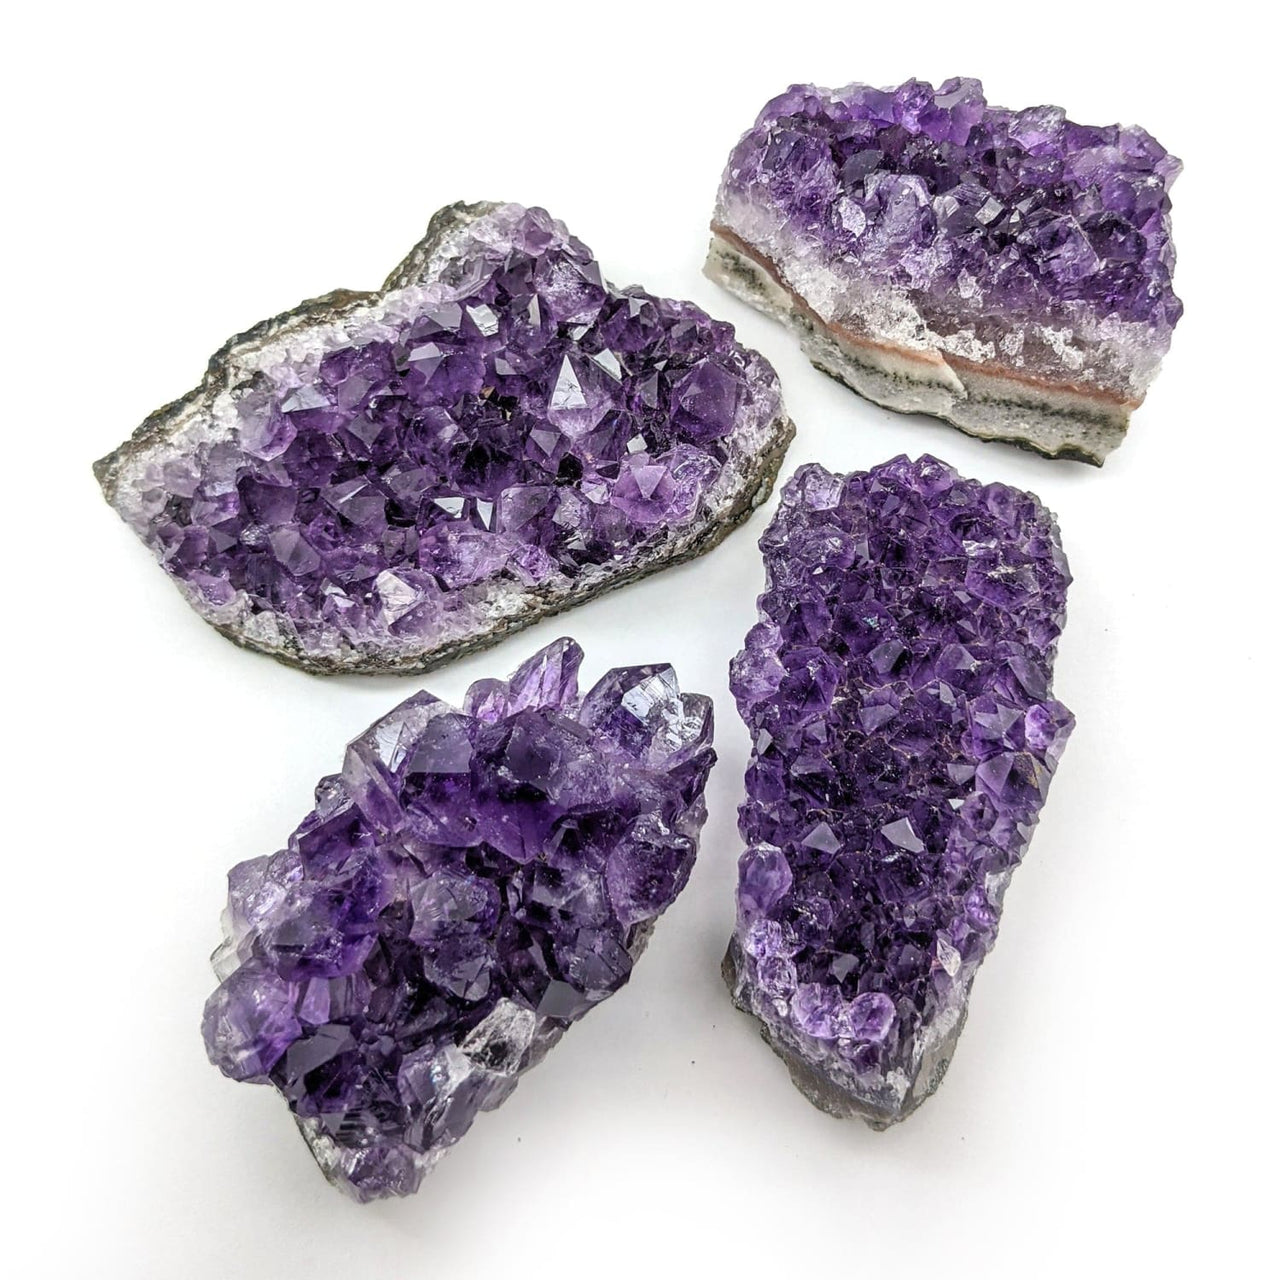 1 Amethyst Geode Grade A From Uruguay - You Pick Size 